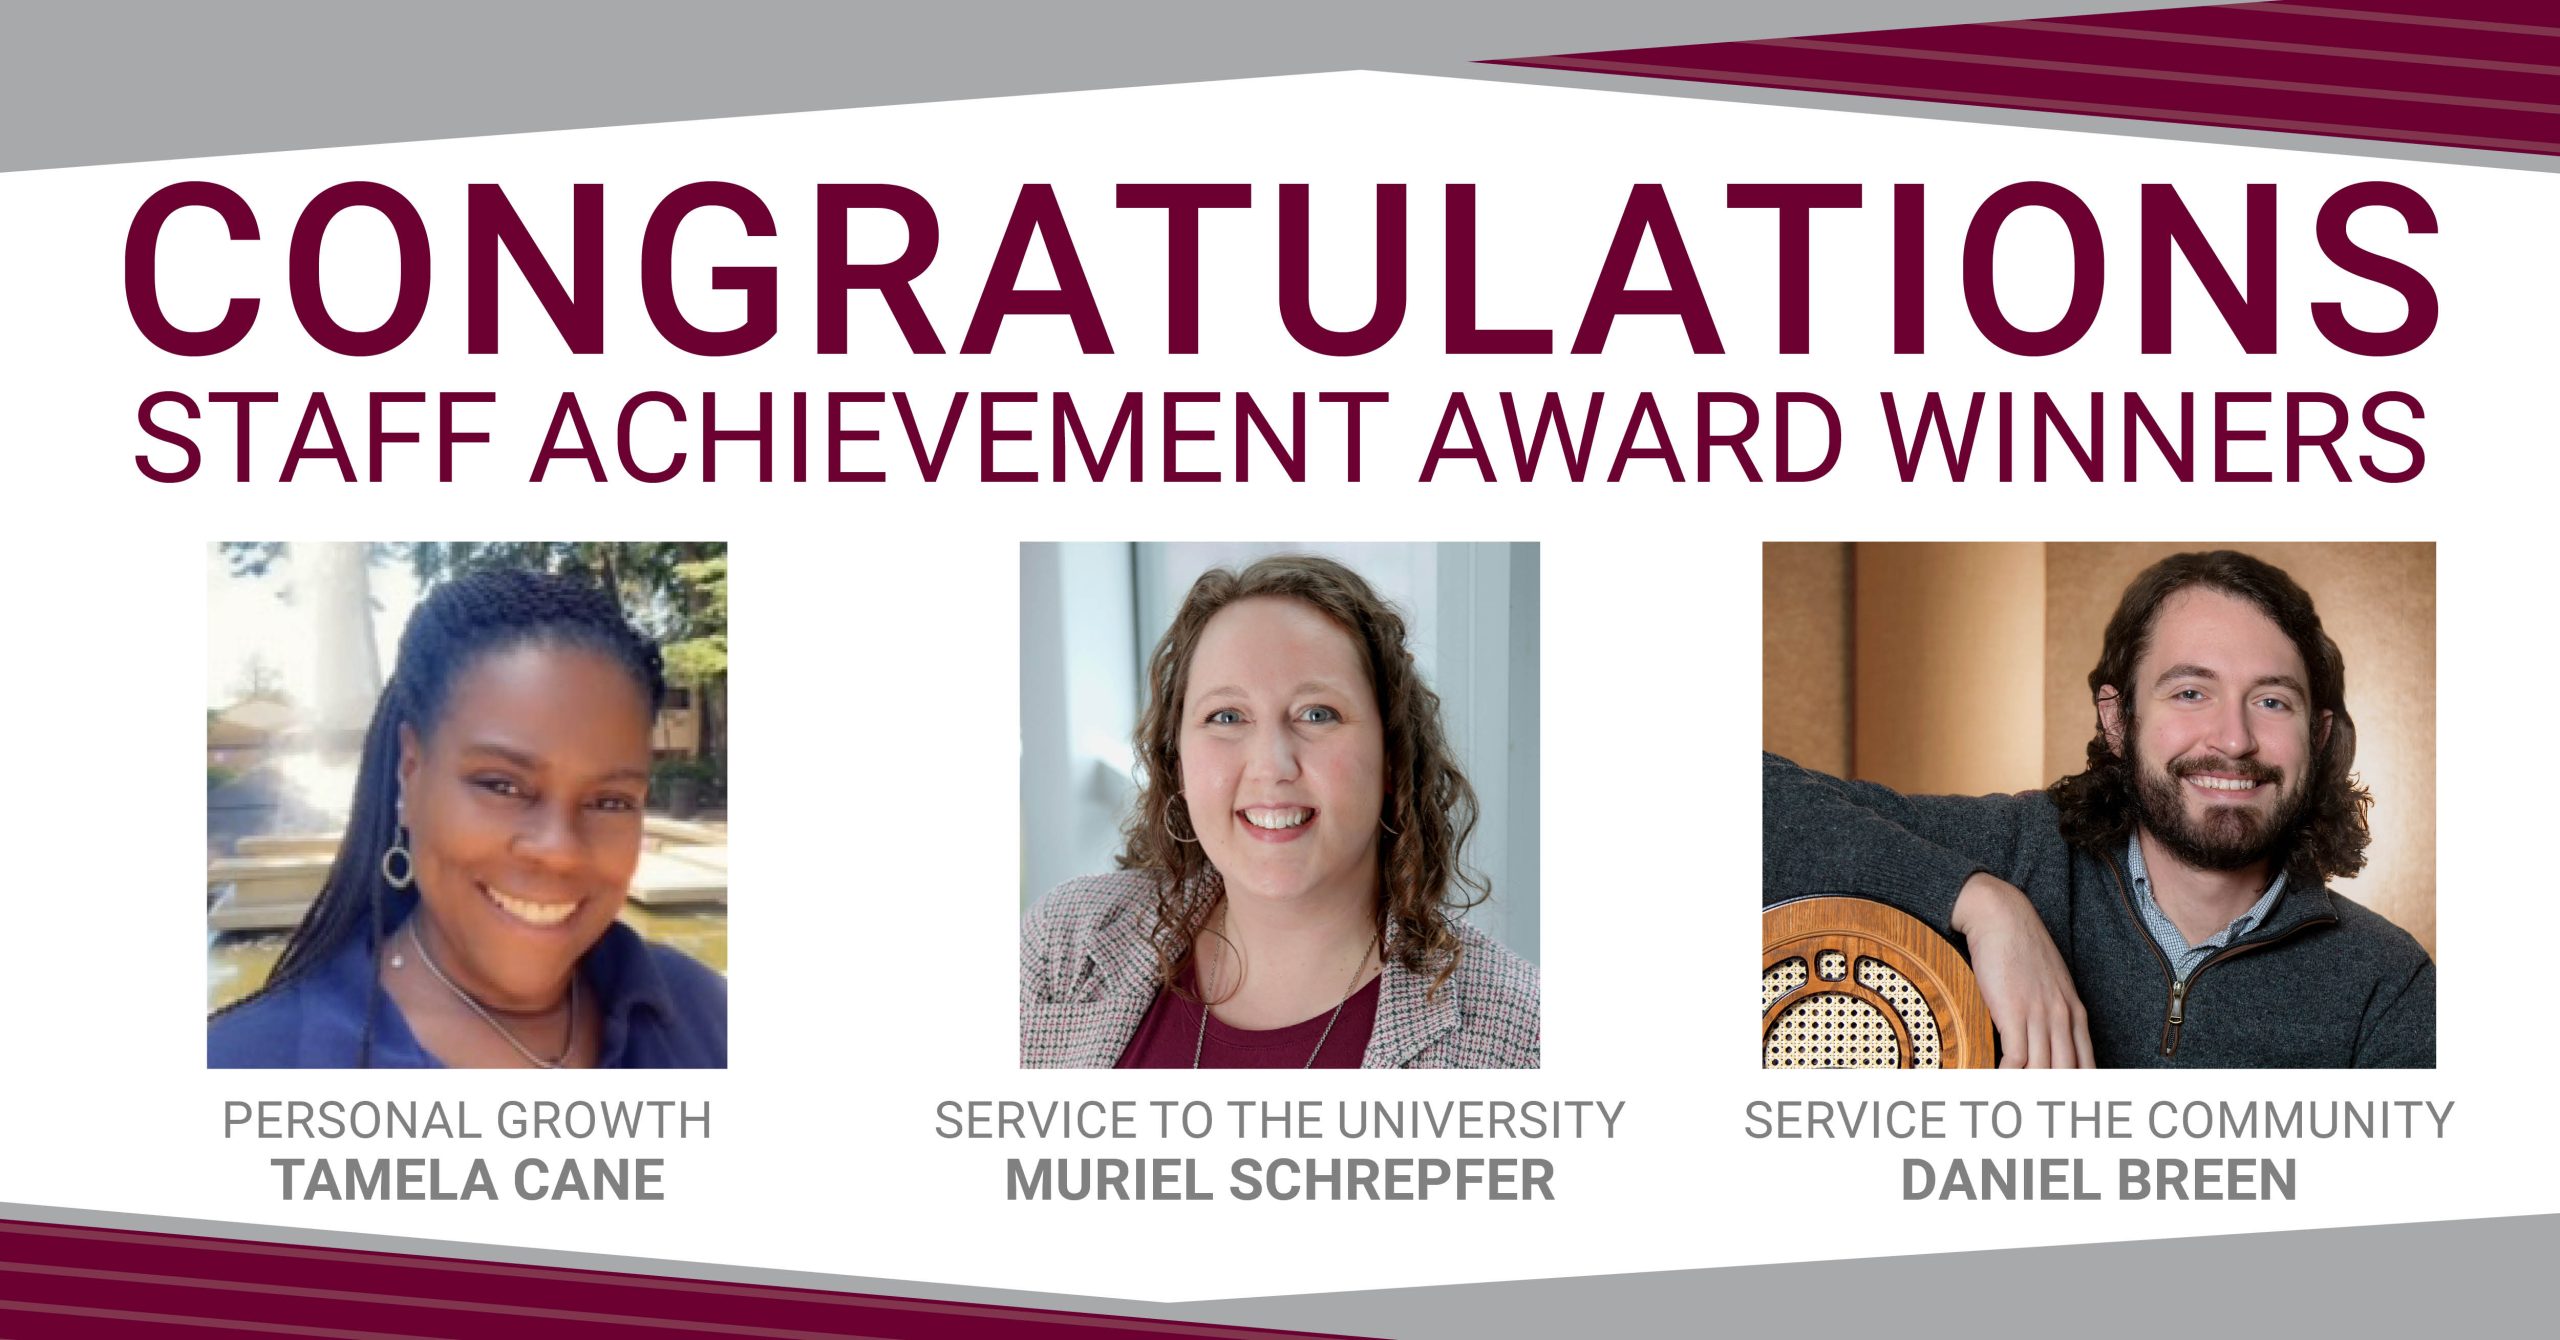 The University of Arkansas at Little Rock has honored three of the university’s outstanding staff members for their exceptional work in the areas of service to the university, community service, and personal growth.